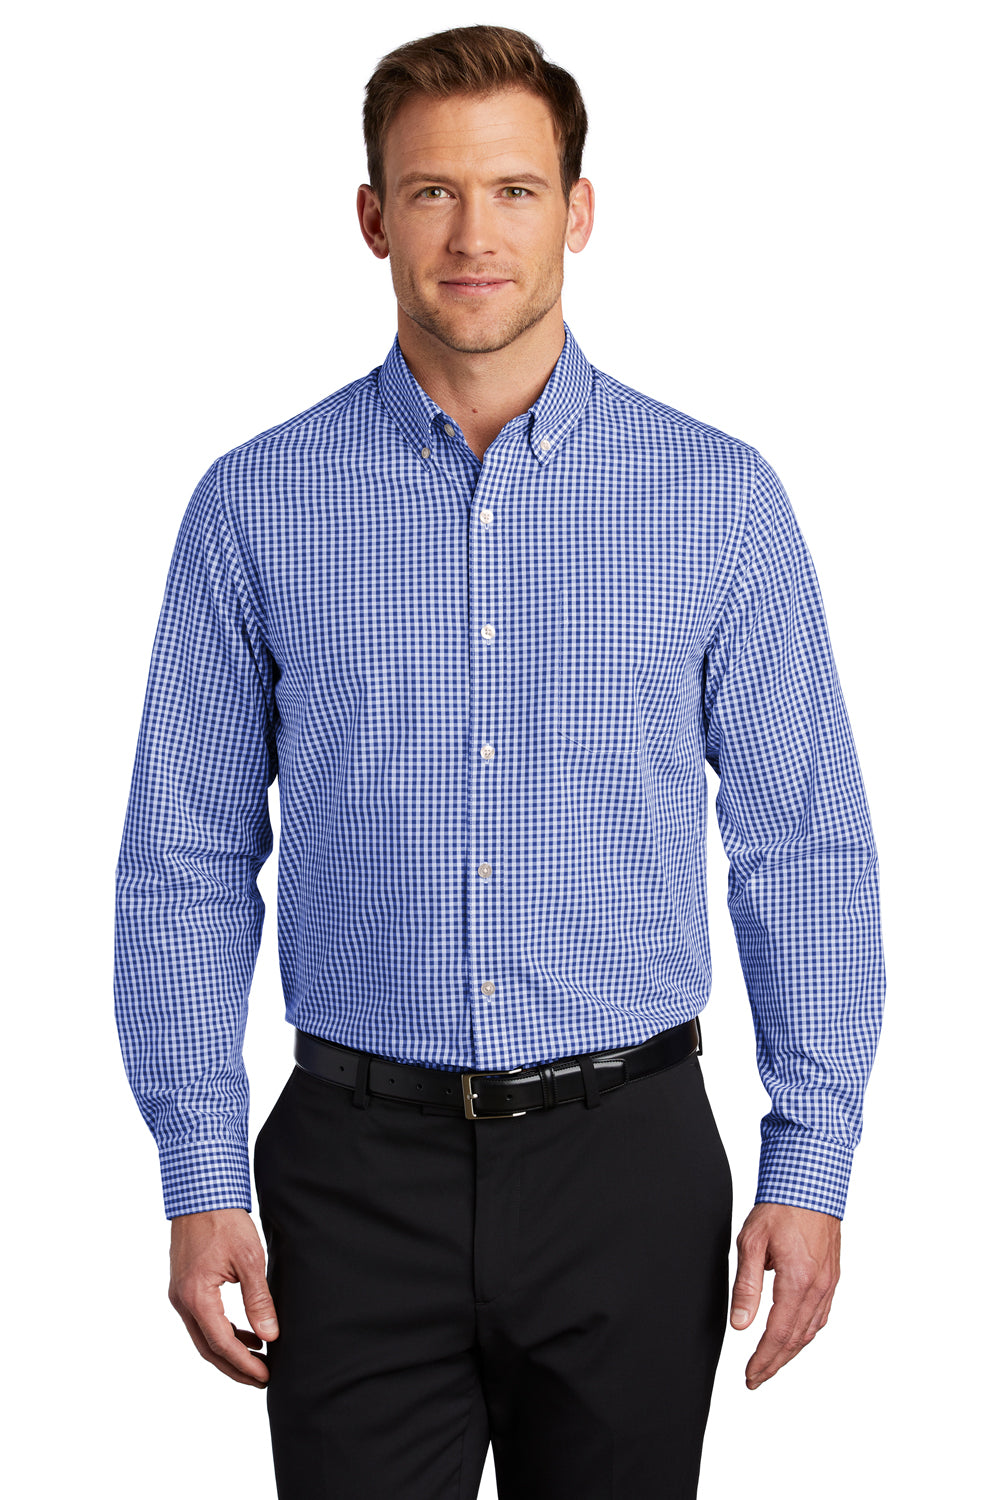 Port Authority Mens Broadcloth Gingham Long Sleeve Button Down Shirt w/ Pocket True Royal Blue/White Front